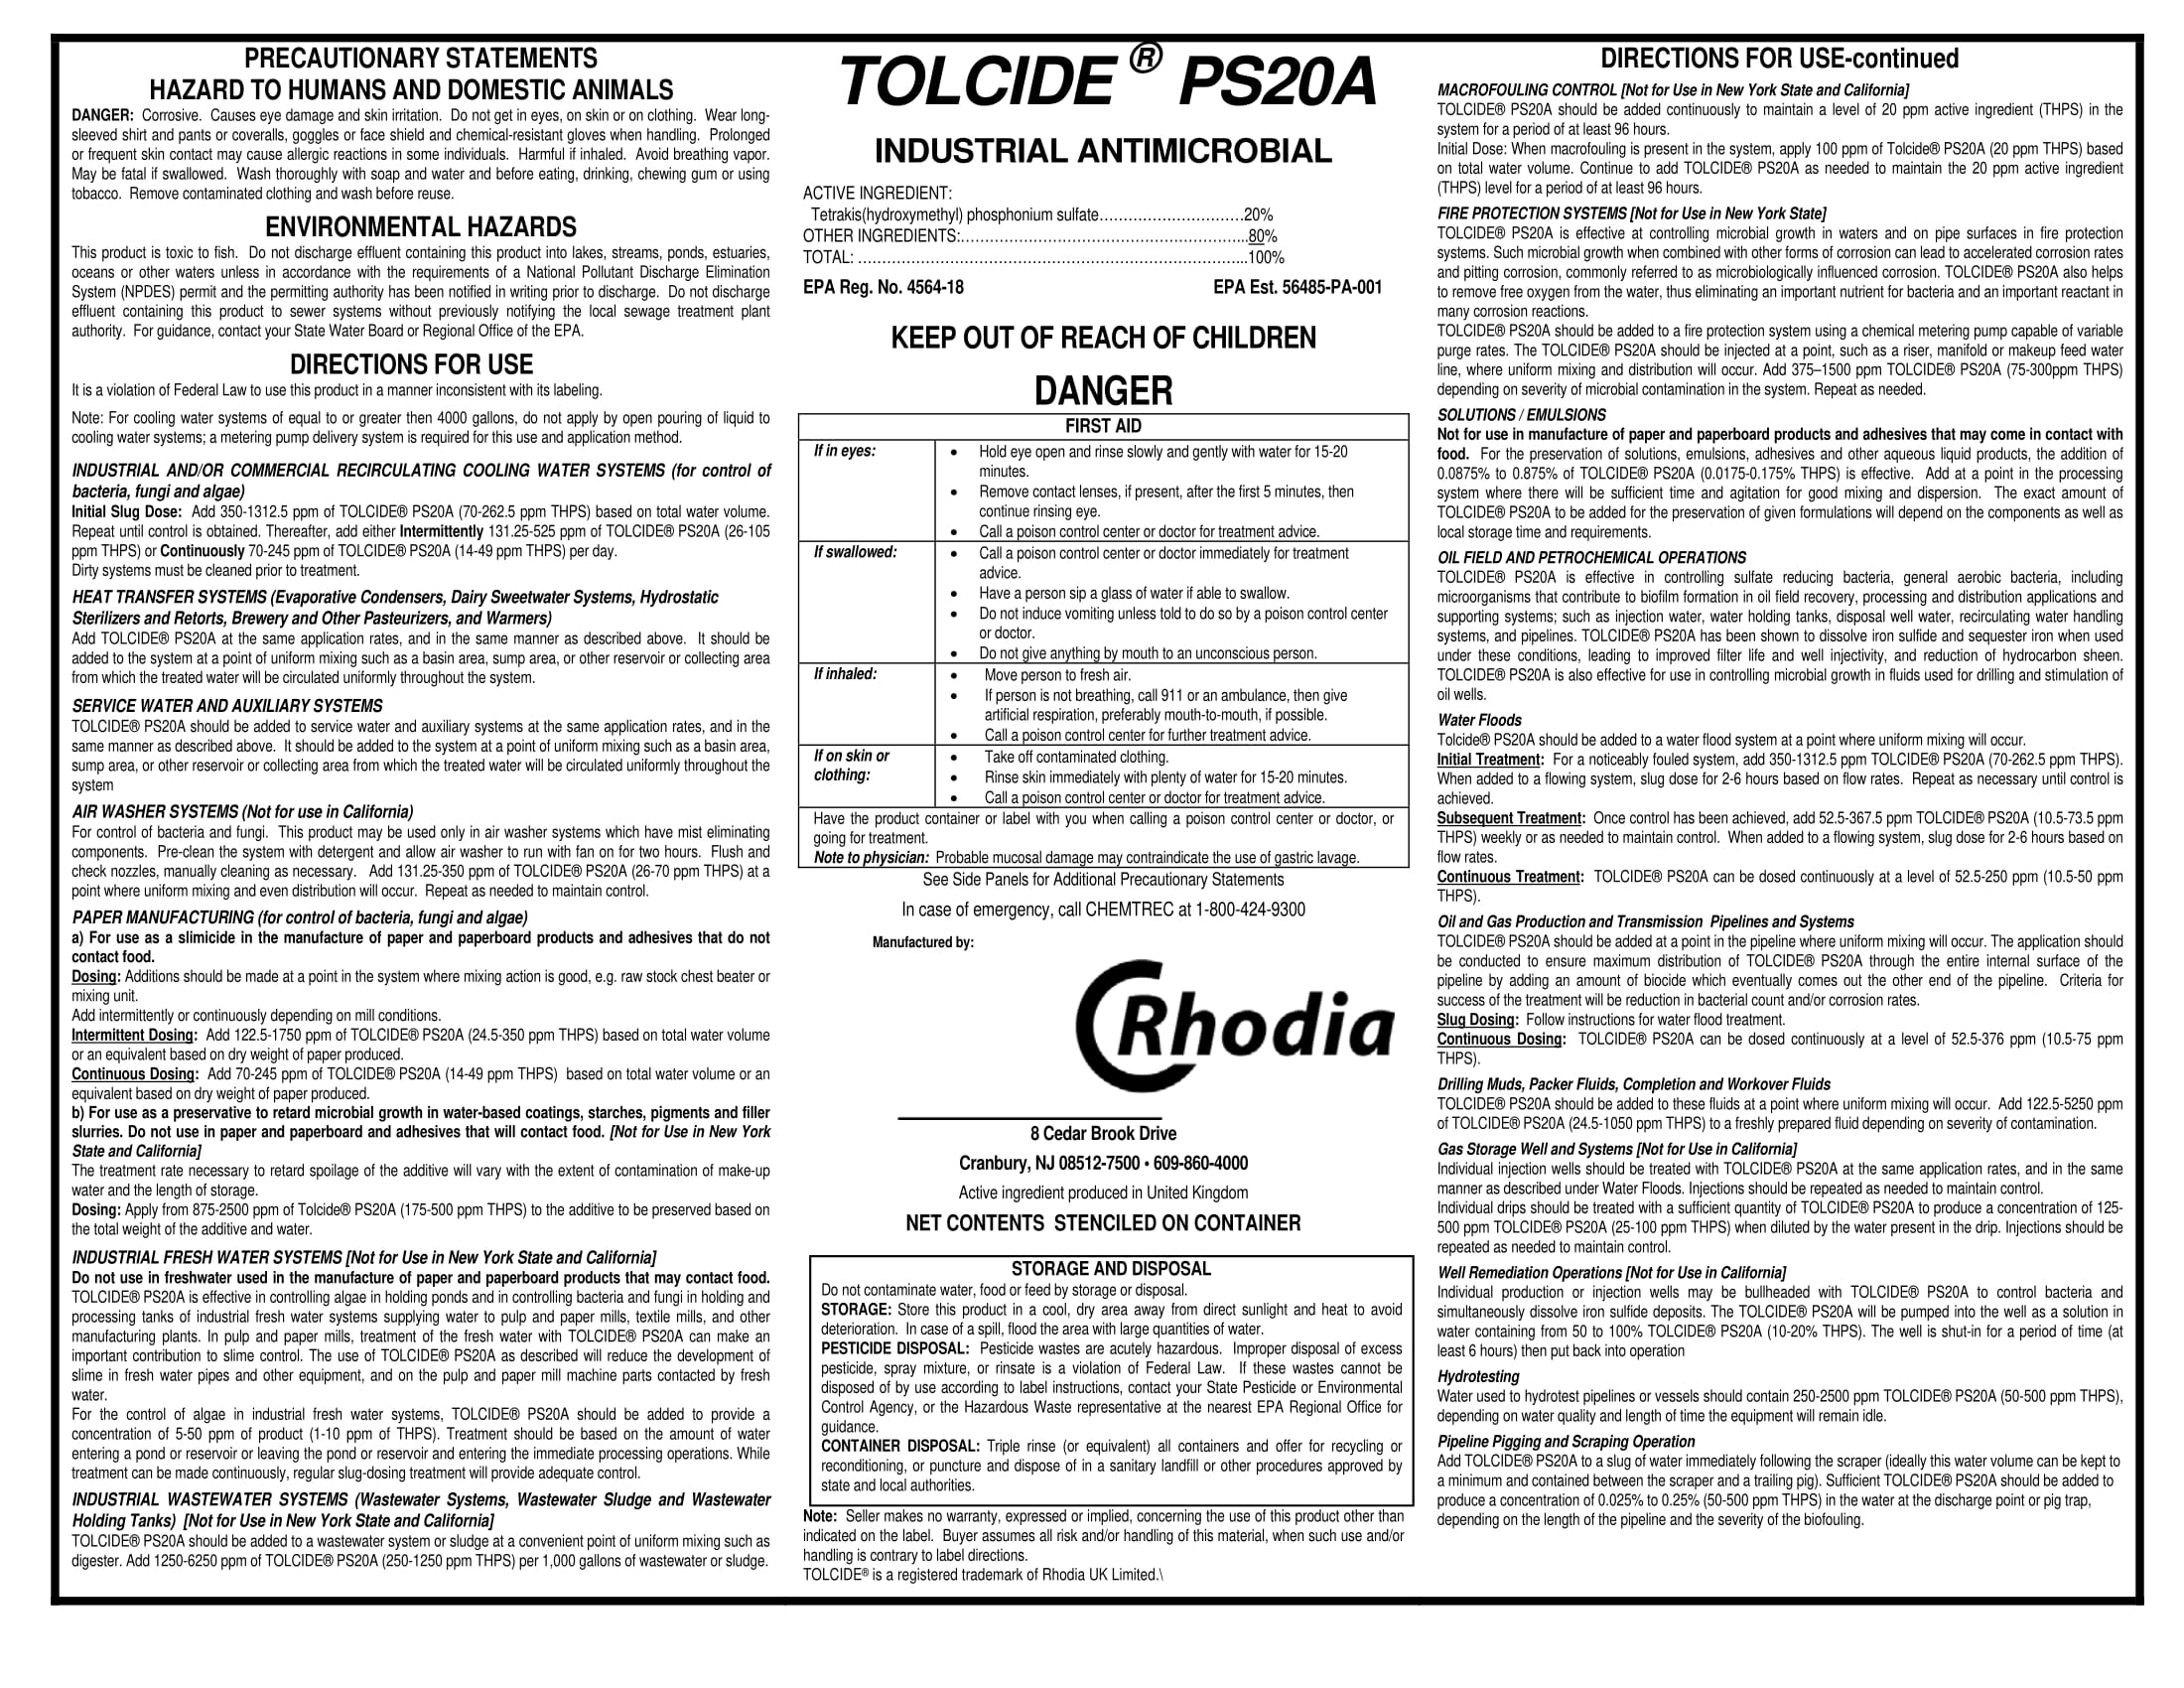 Tolcide PS-20A Datasheet